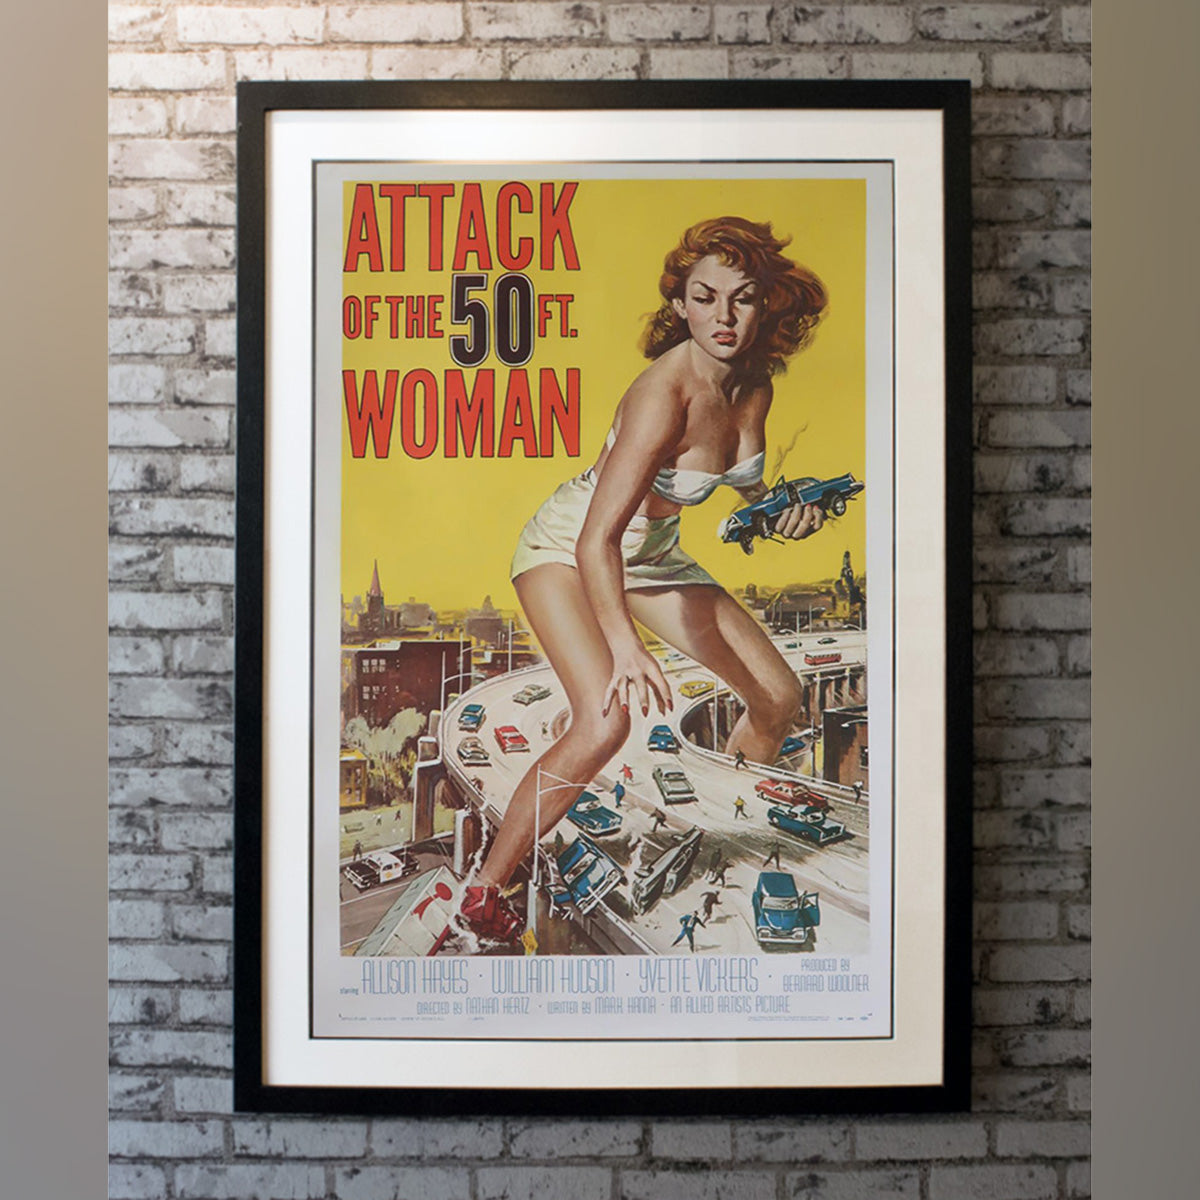 Original Movie Poster of Attack Of The 50 Ft. Woman (1958)